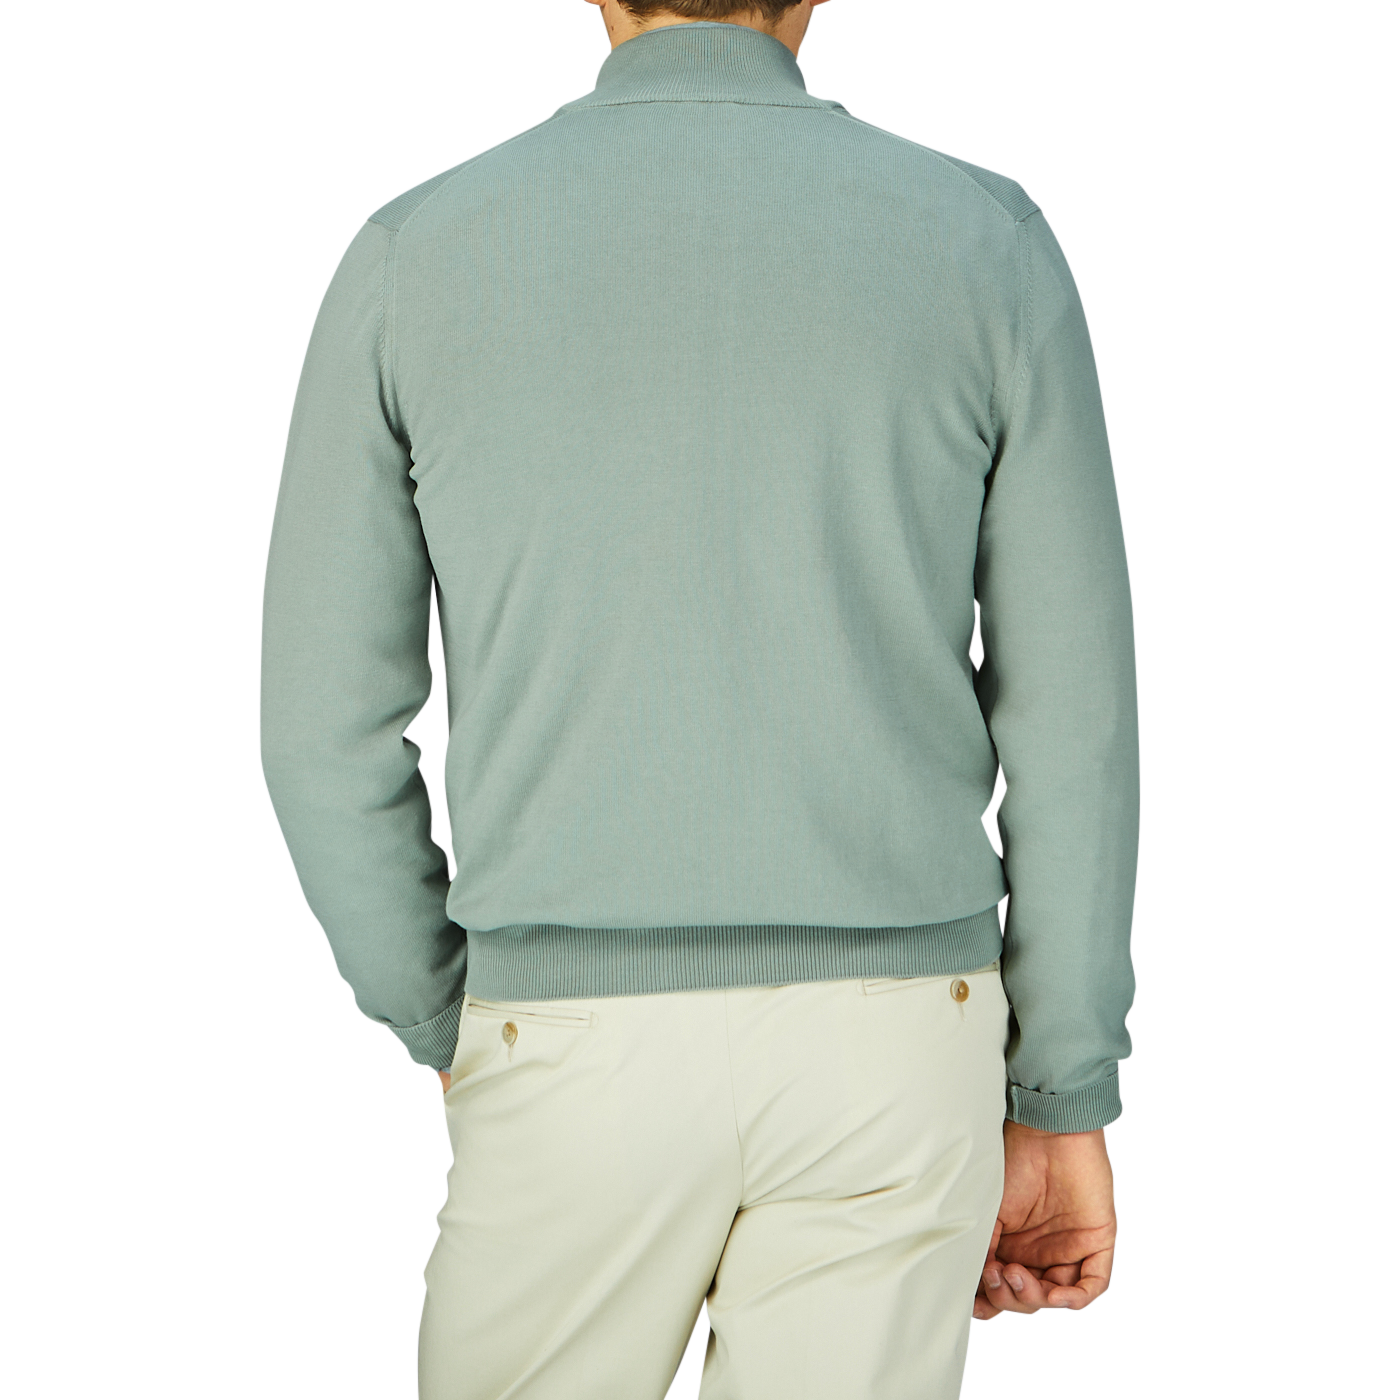 A man seen from behind wearing a slim fit, sage green Gran Sasso Egyptian Cotton 1/4 Zip sweater and light-colored pants.